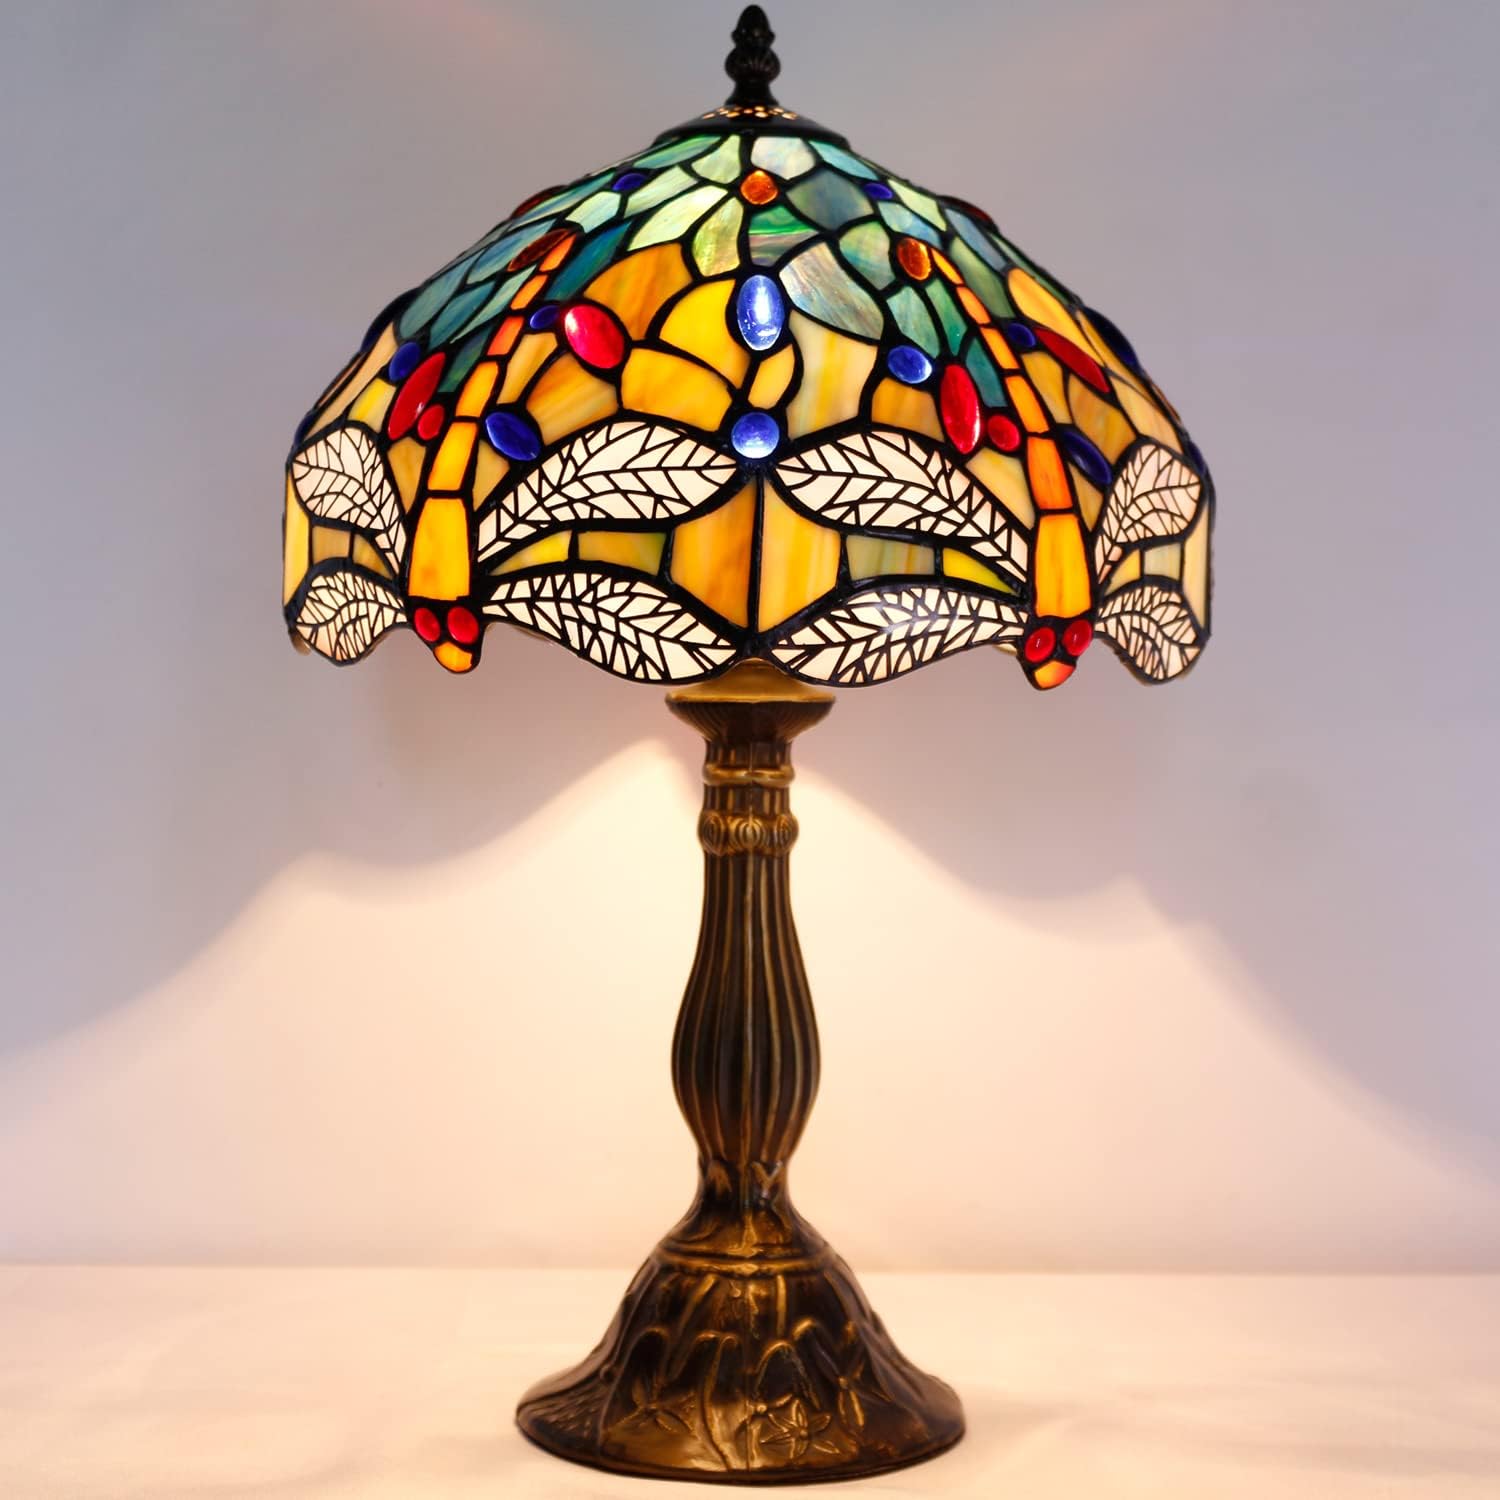 GEDUBIUBOO  Lamp Sea Blue Yellow Stained Glass Dragonfly Style Table Lamp Nautical Reading Desk Bedside Light 12X12X18 Inches Decor Bedroom Living Room  Office S128 Series